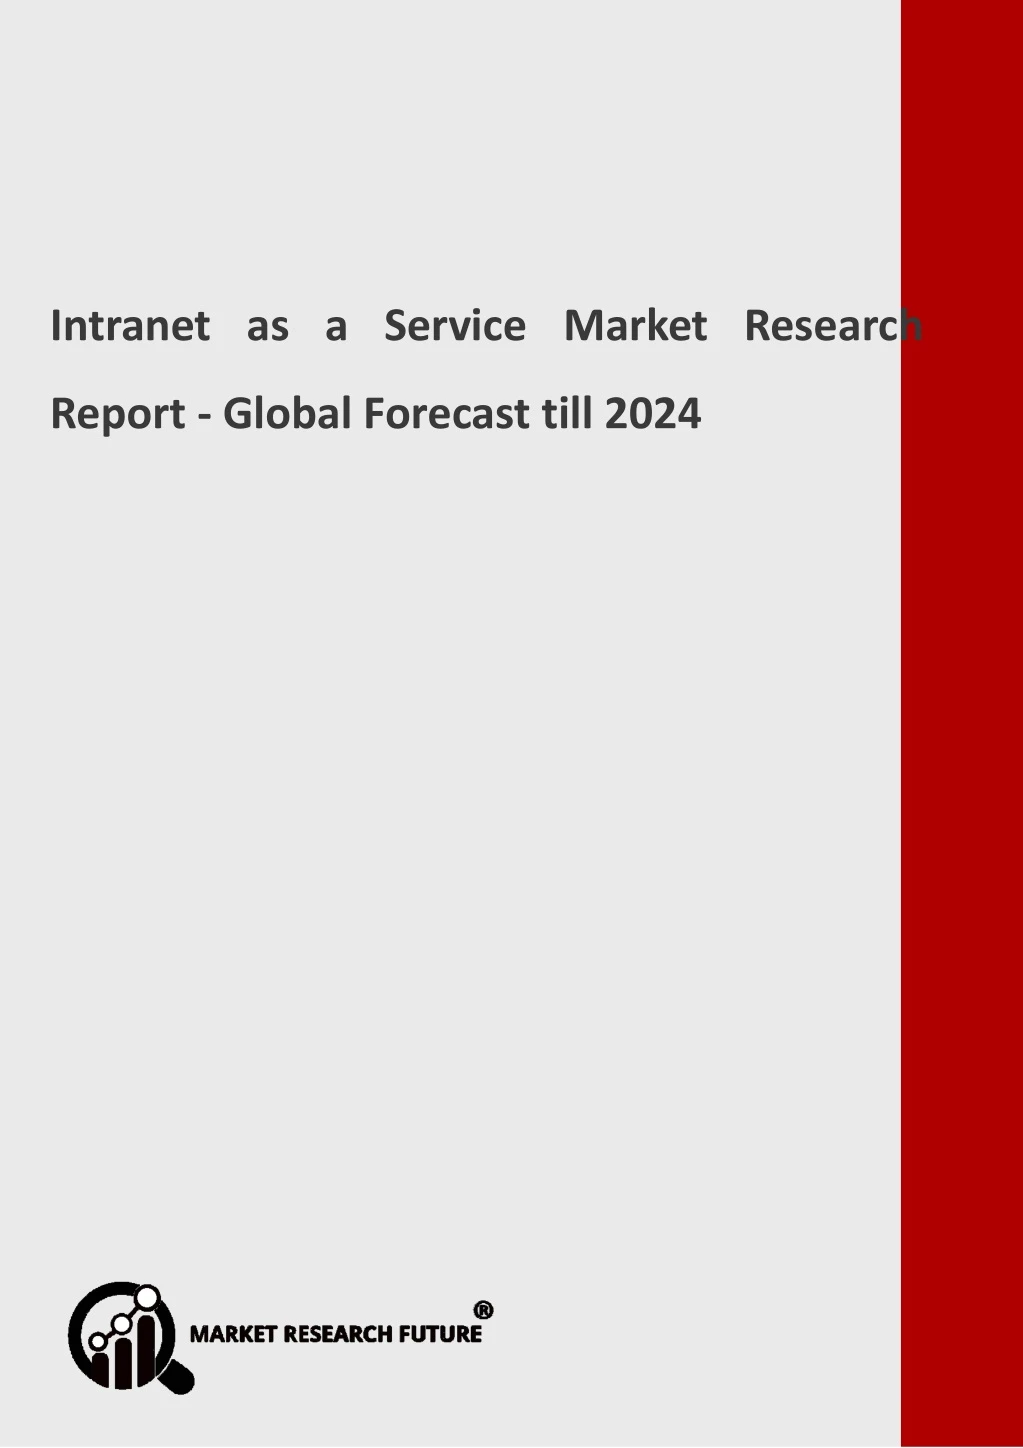 intranet as a service market research report